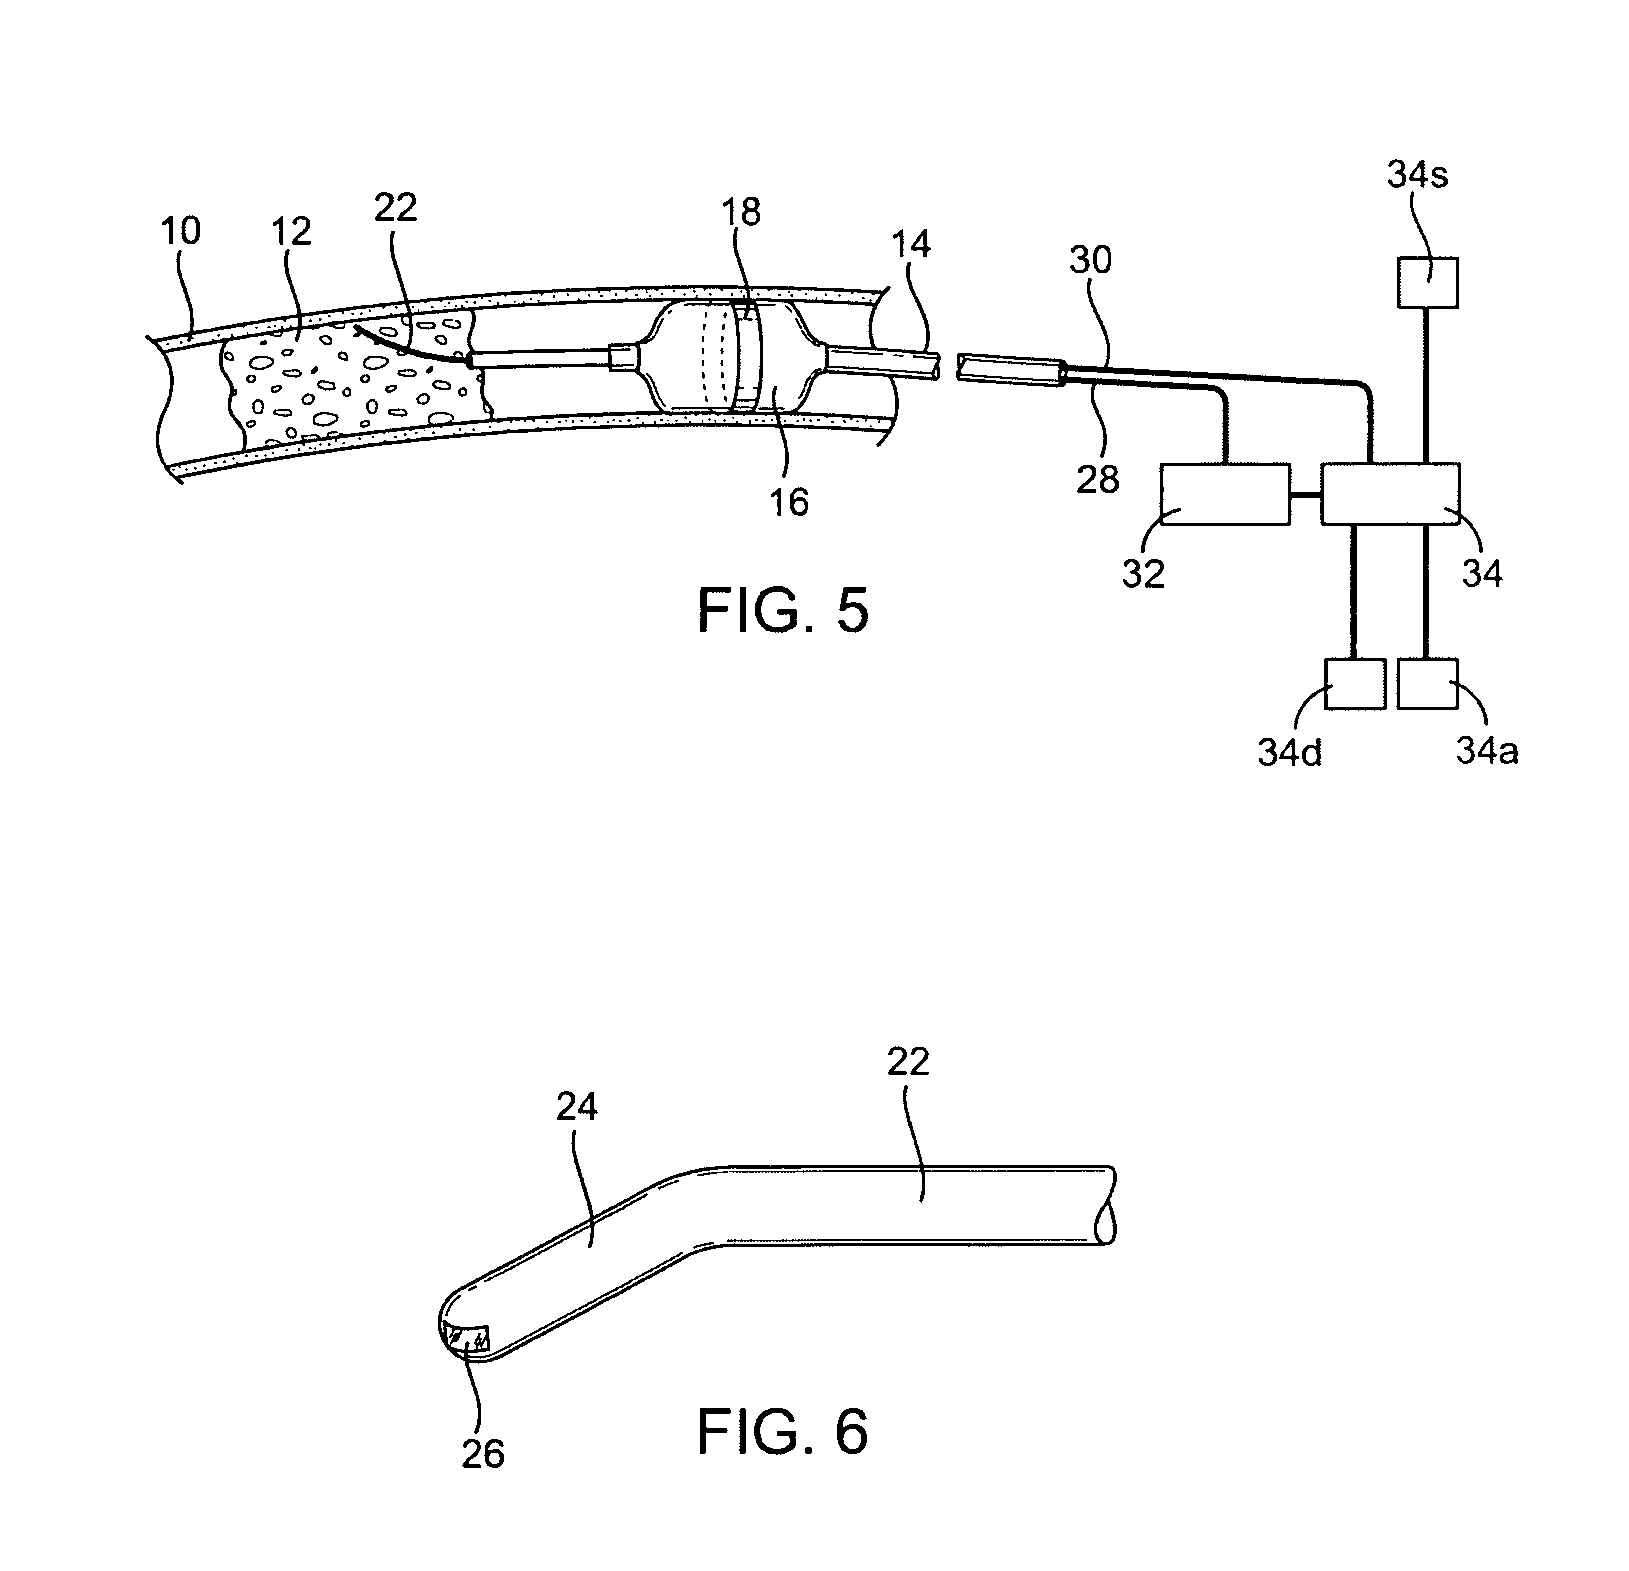 Intraluminal guidance system using bioelectric impedance